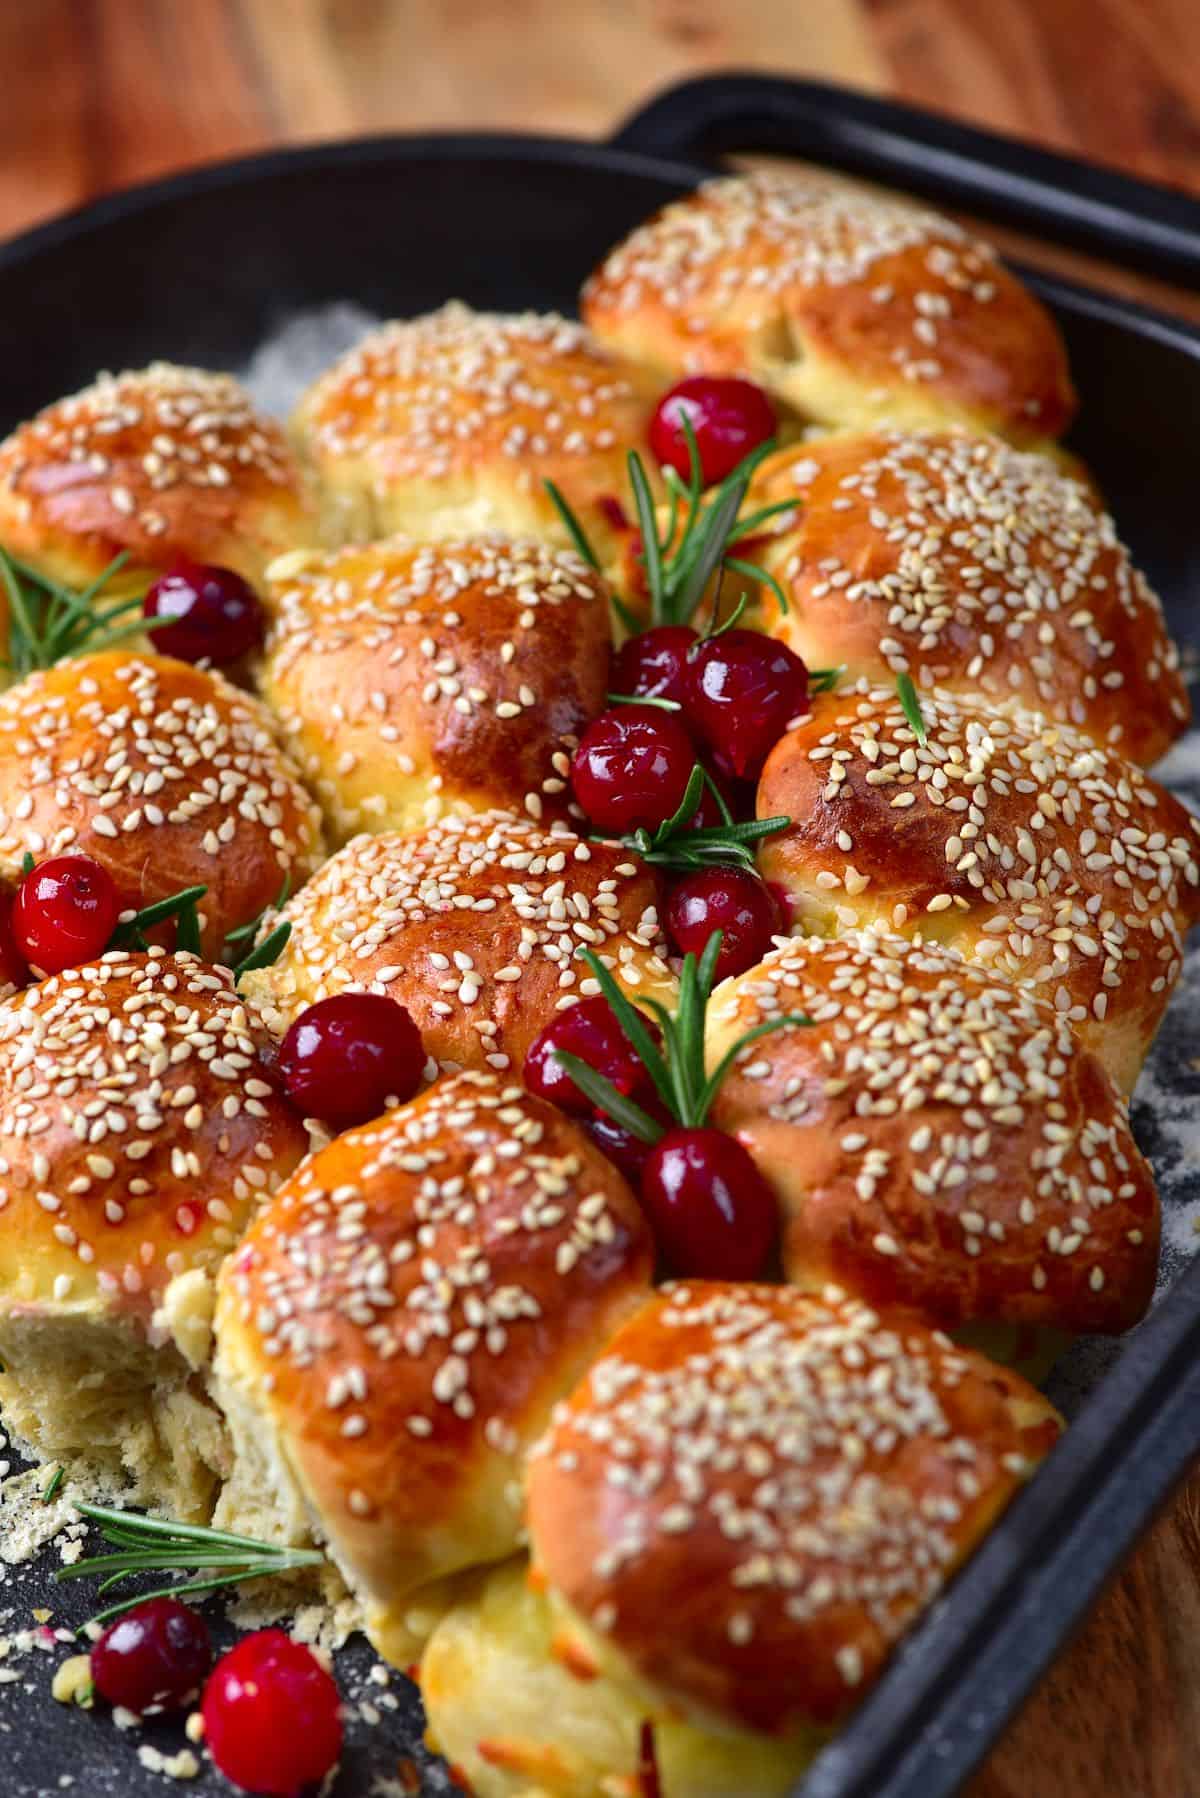 Cheese buns topped with rosemary and cranberries